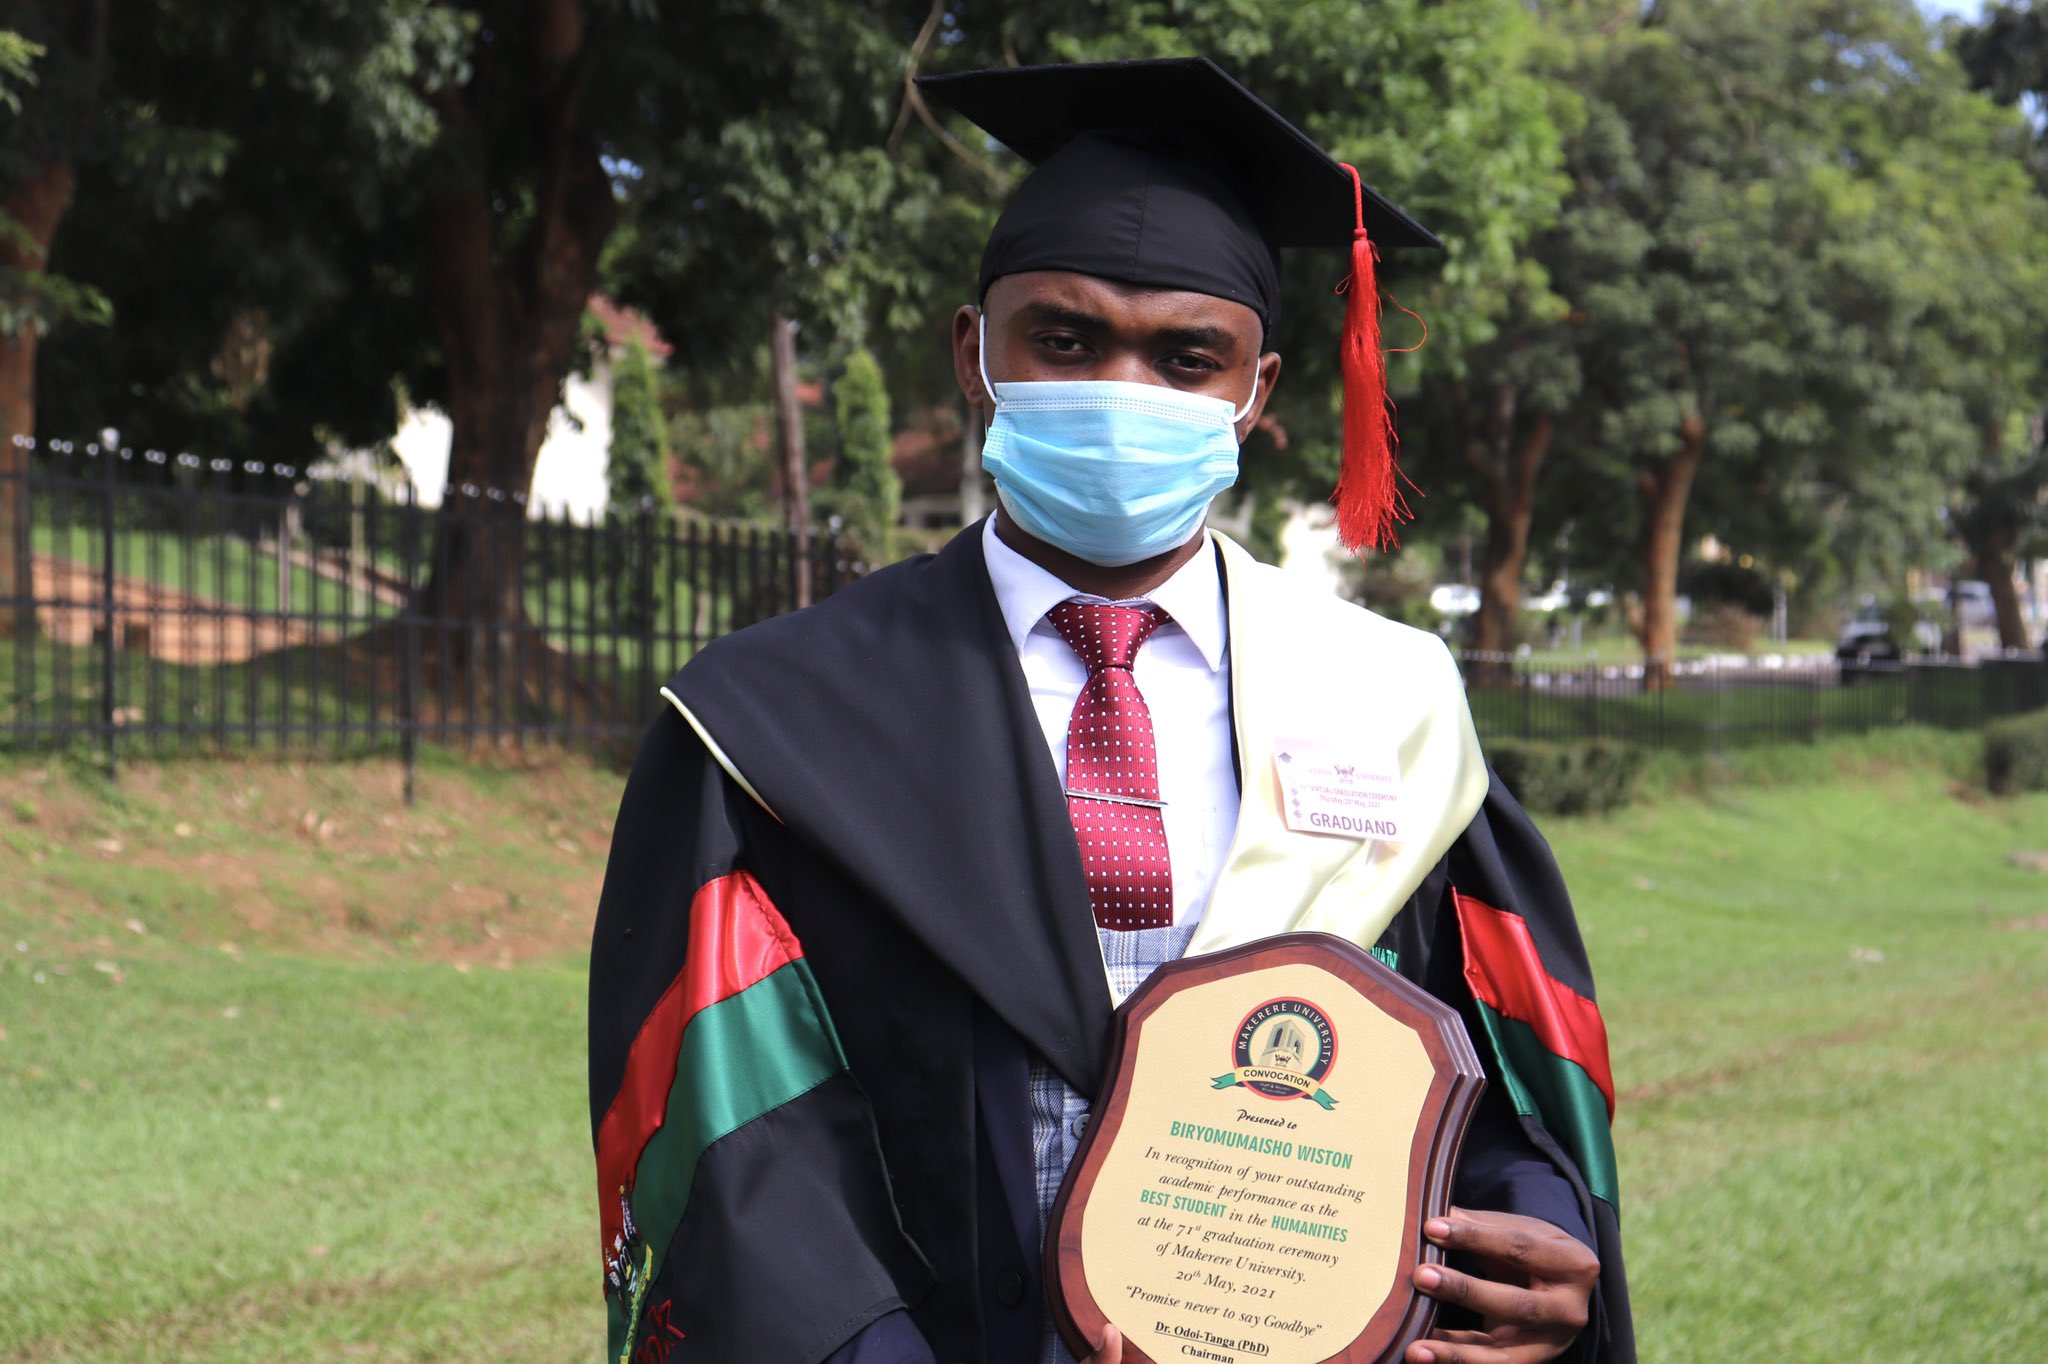 Mr. Biryomumaisho Wiston, 71st Graduation's best overall and best Humanities student poses with the Convocation plaque in the Freedom Square, Makerere University on Day 4, 20th May 2021. He obtained a CGPA of 4.91 out of 5.0 in BBA.